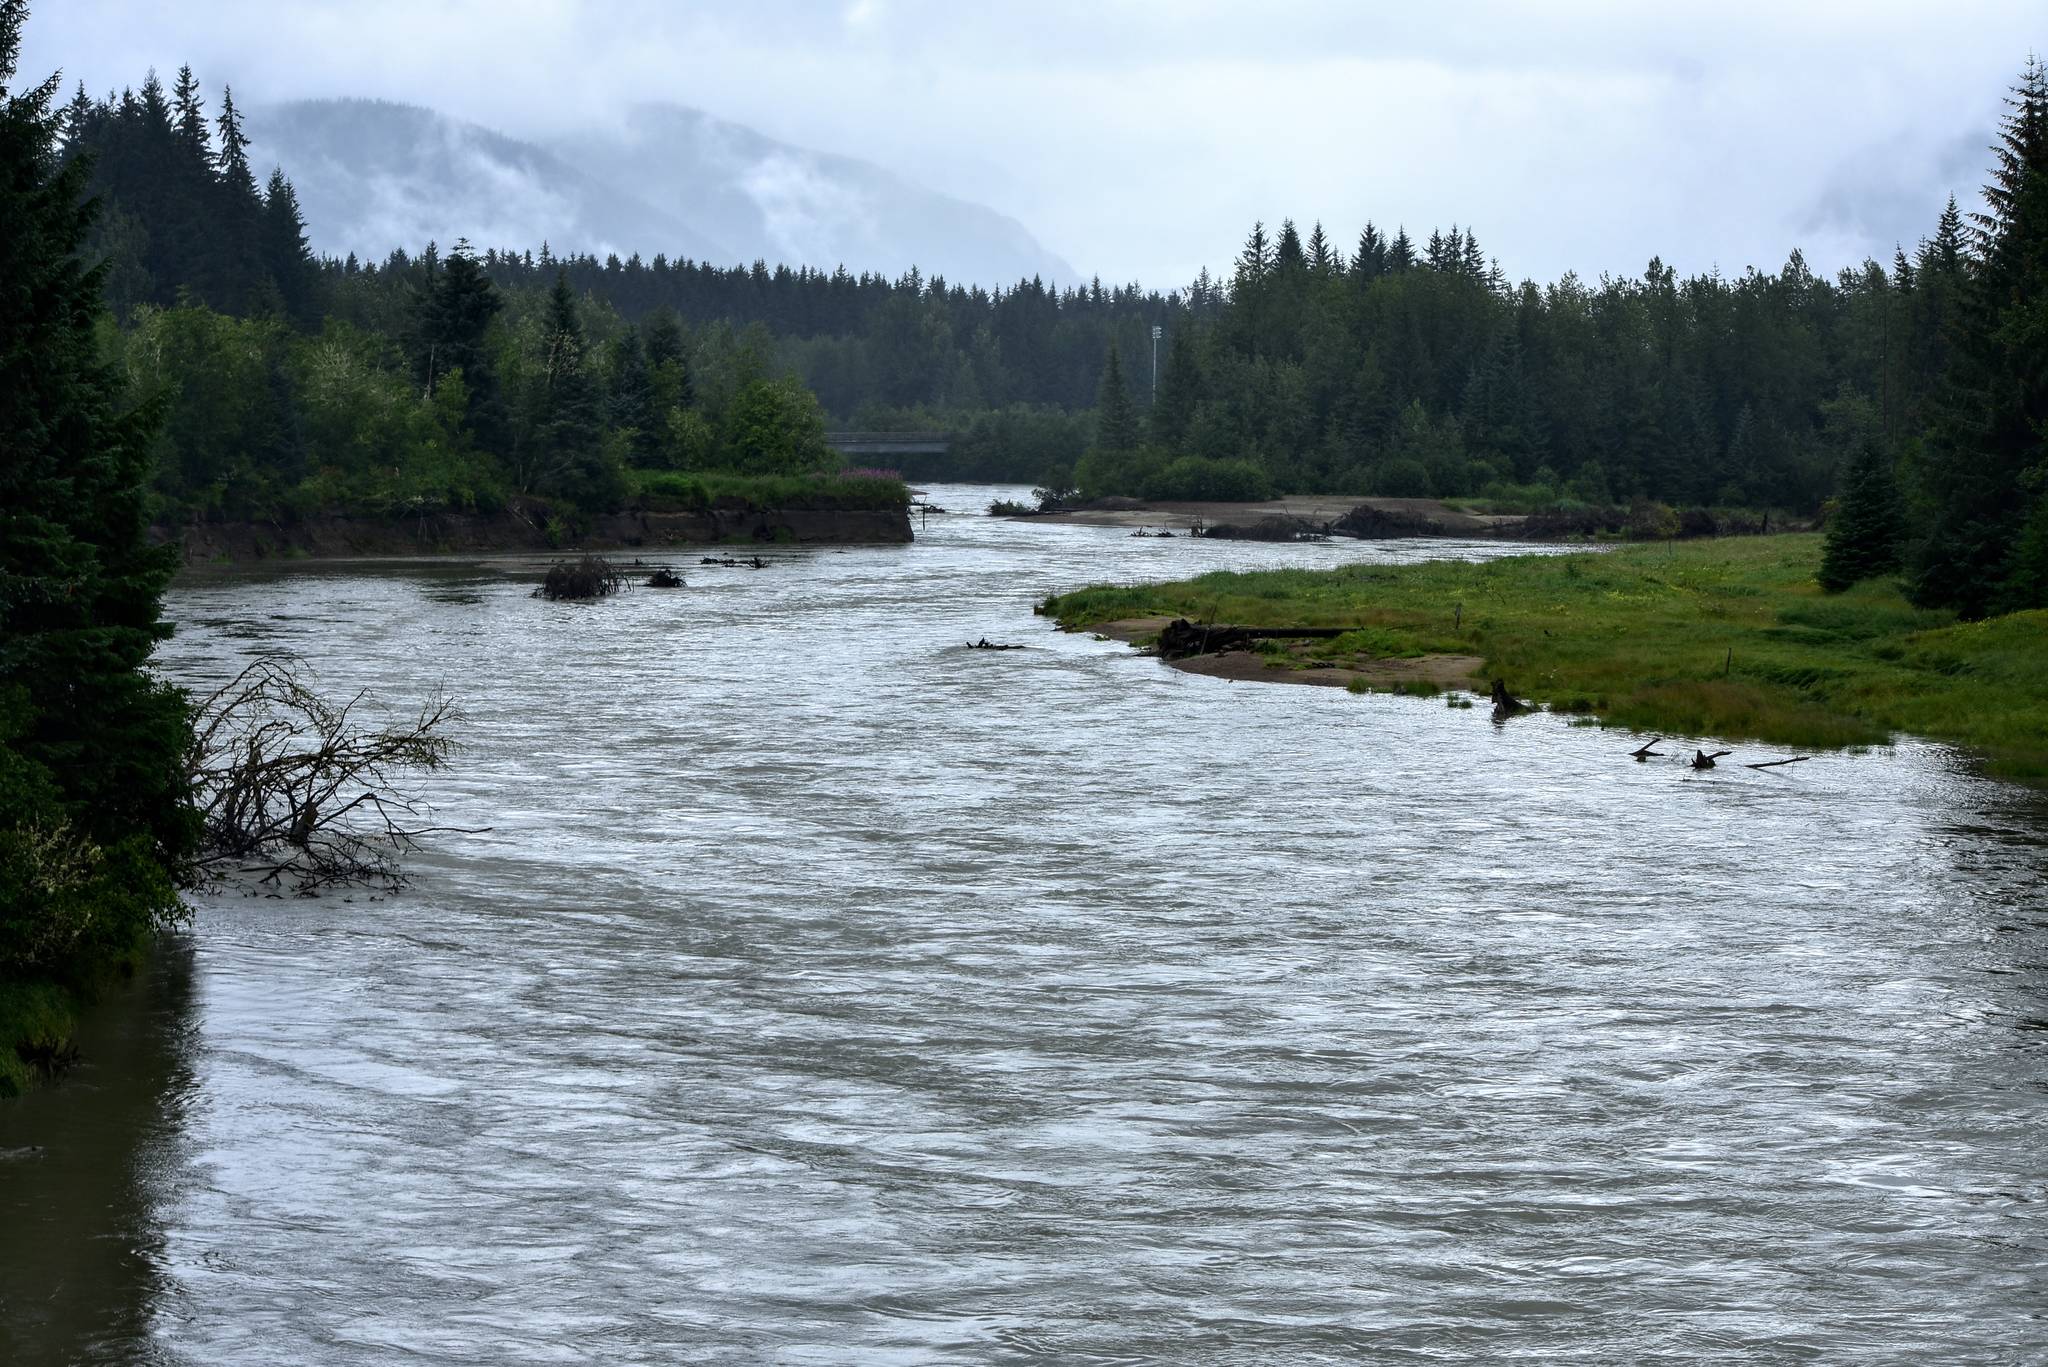 Peter Segall / Juneau Empire                                 The banks of the Mendenhall River were high on Sunday, July 26, 2020. National Weather Service is monitoring the river’s potentially dangerous water level rise.